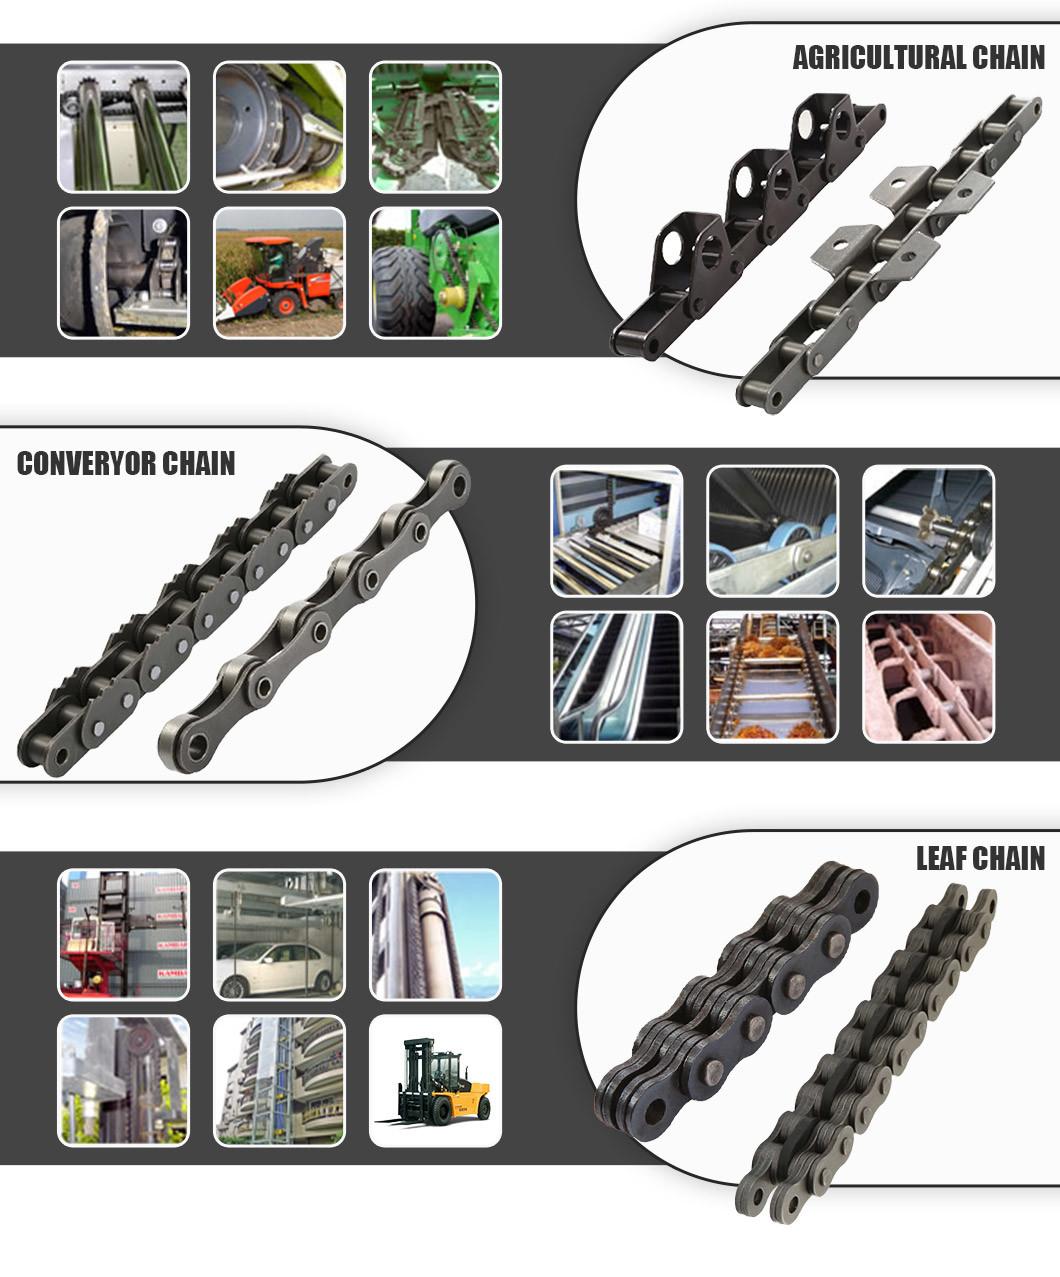 High Quality Motorcycle Conveyor Roller Chain Stainless Steel Professional China Factory Supply (ANSI, BS, DIN, JIS Standard)